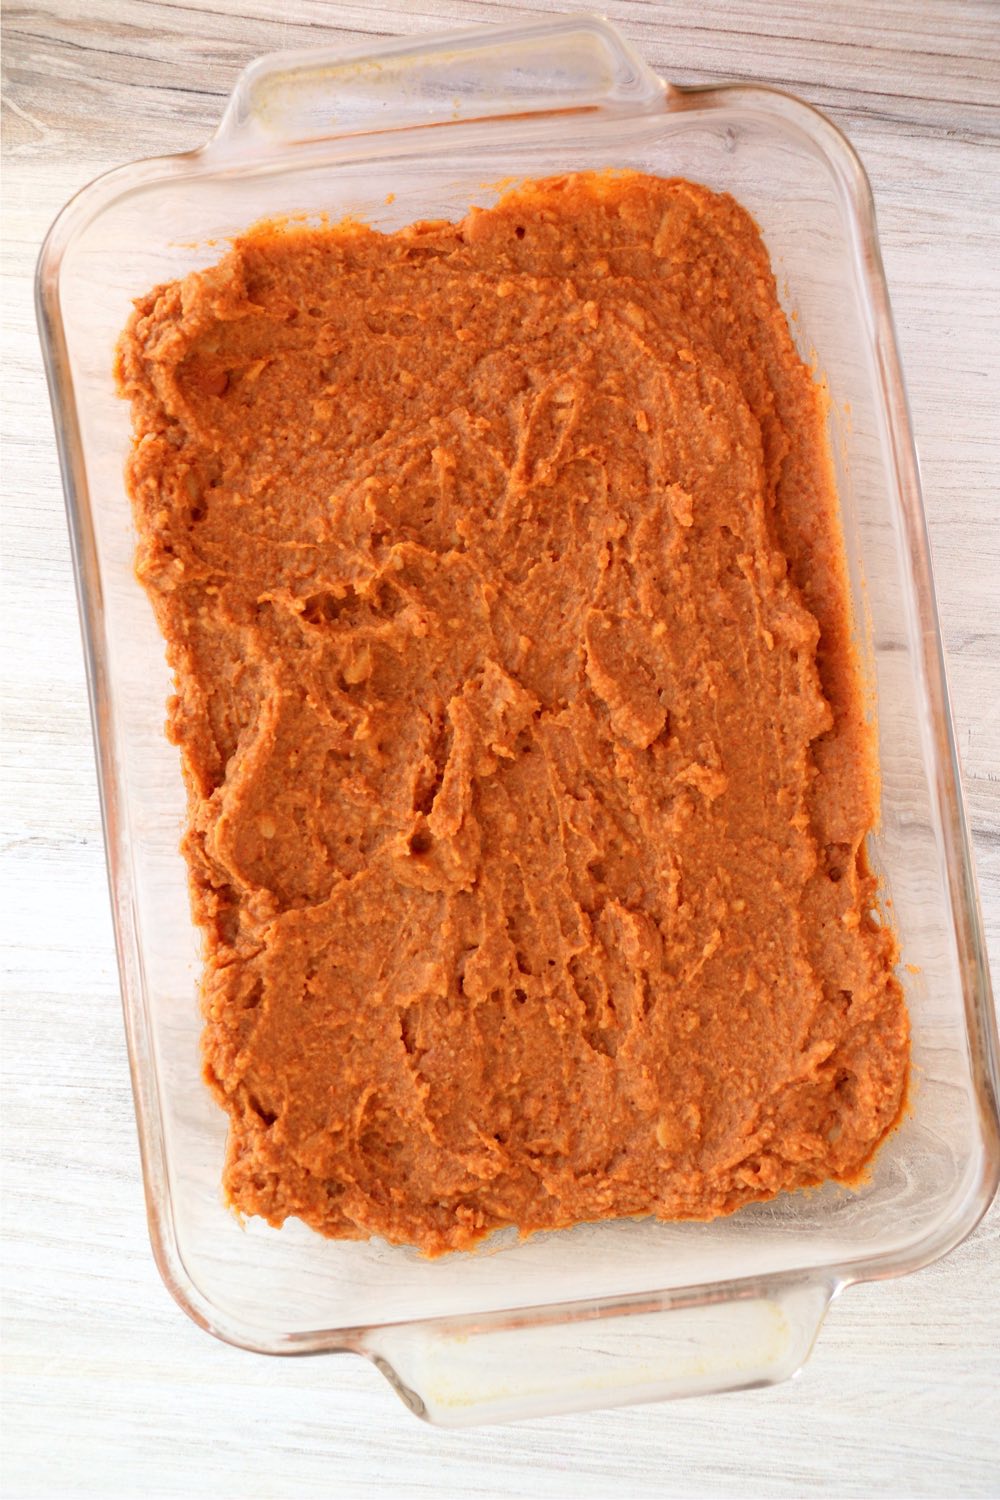 refried beans spread on the bottom of a glass dish